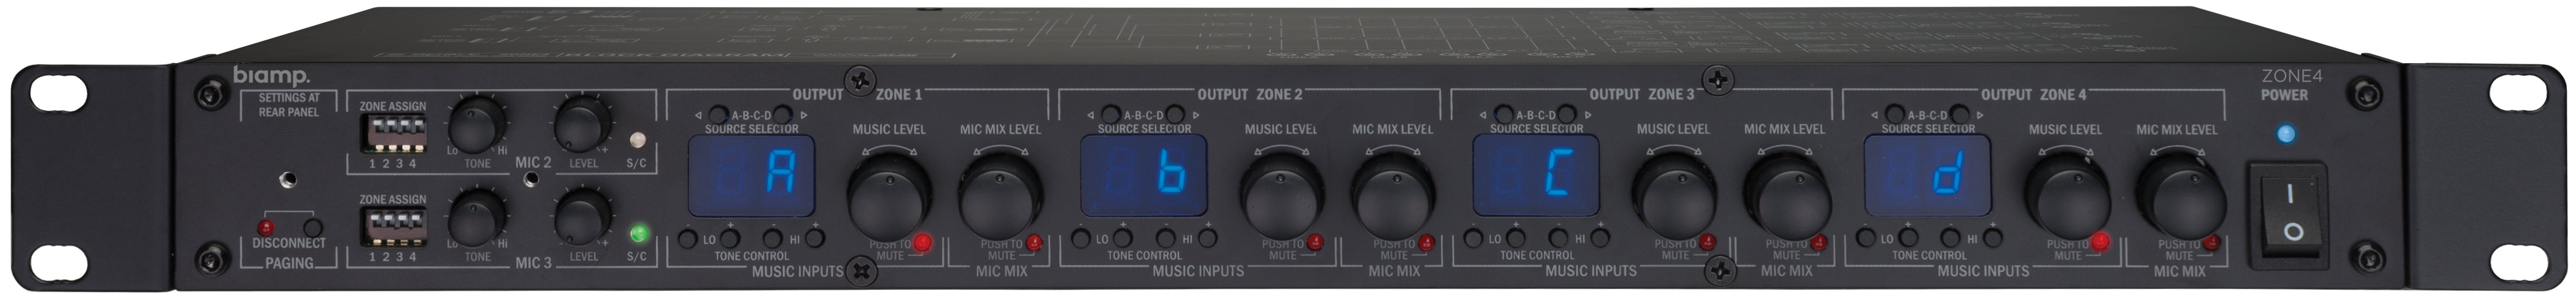 The Biamp ZONE4 Pre-Amplifier front view in hi-resolution